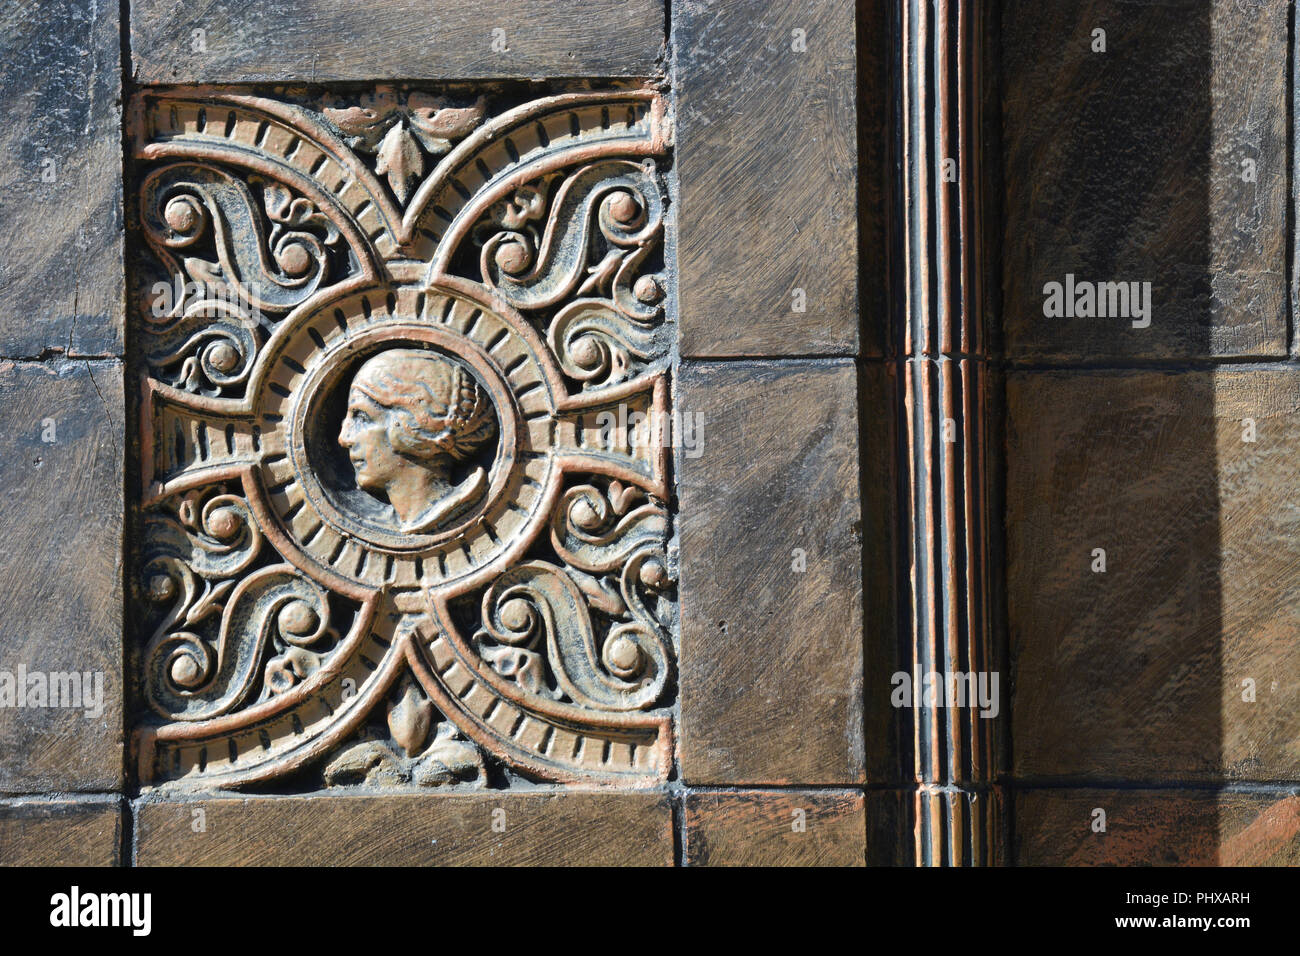 Architectural detail on The Aragon Ballroom located in Chicago's north side Uptown neighborhood. Stock Photo